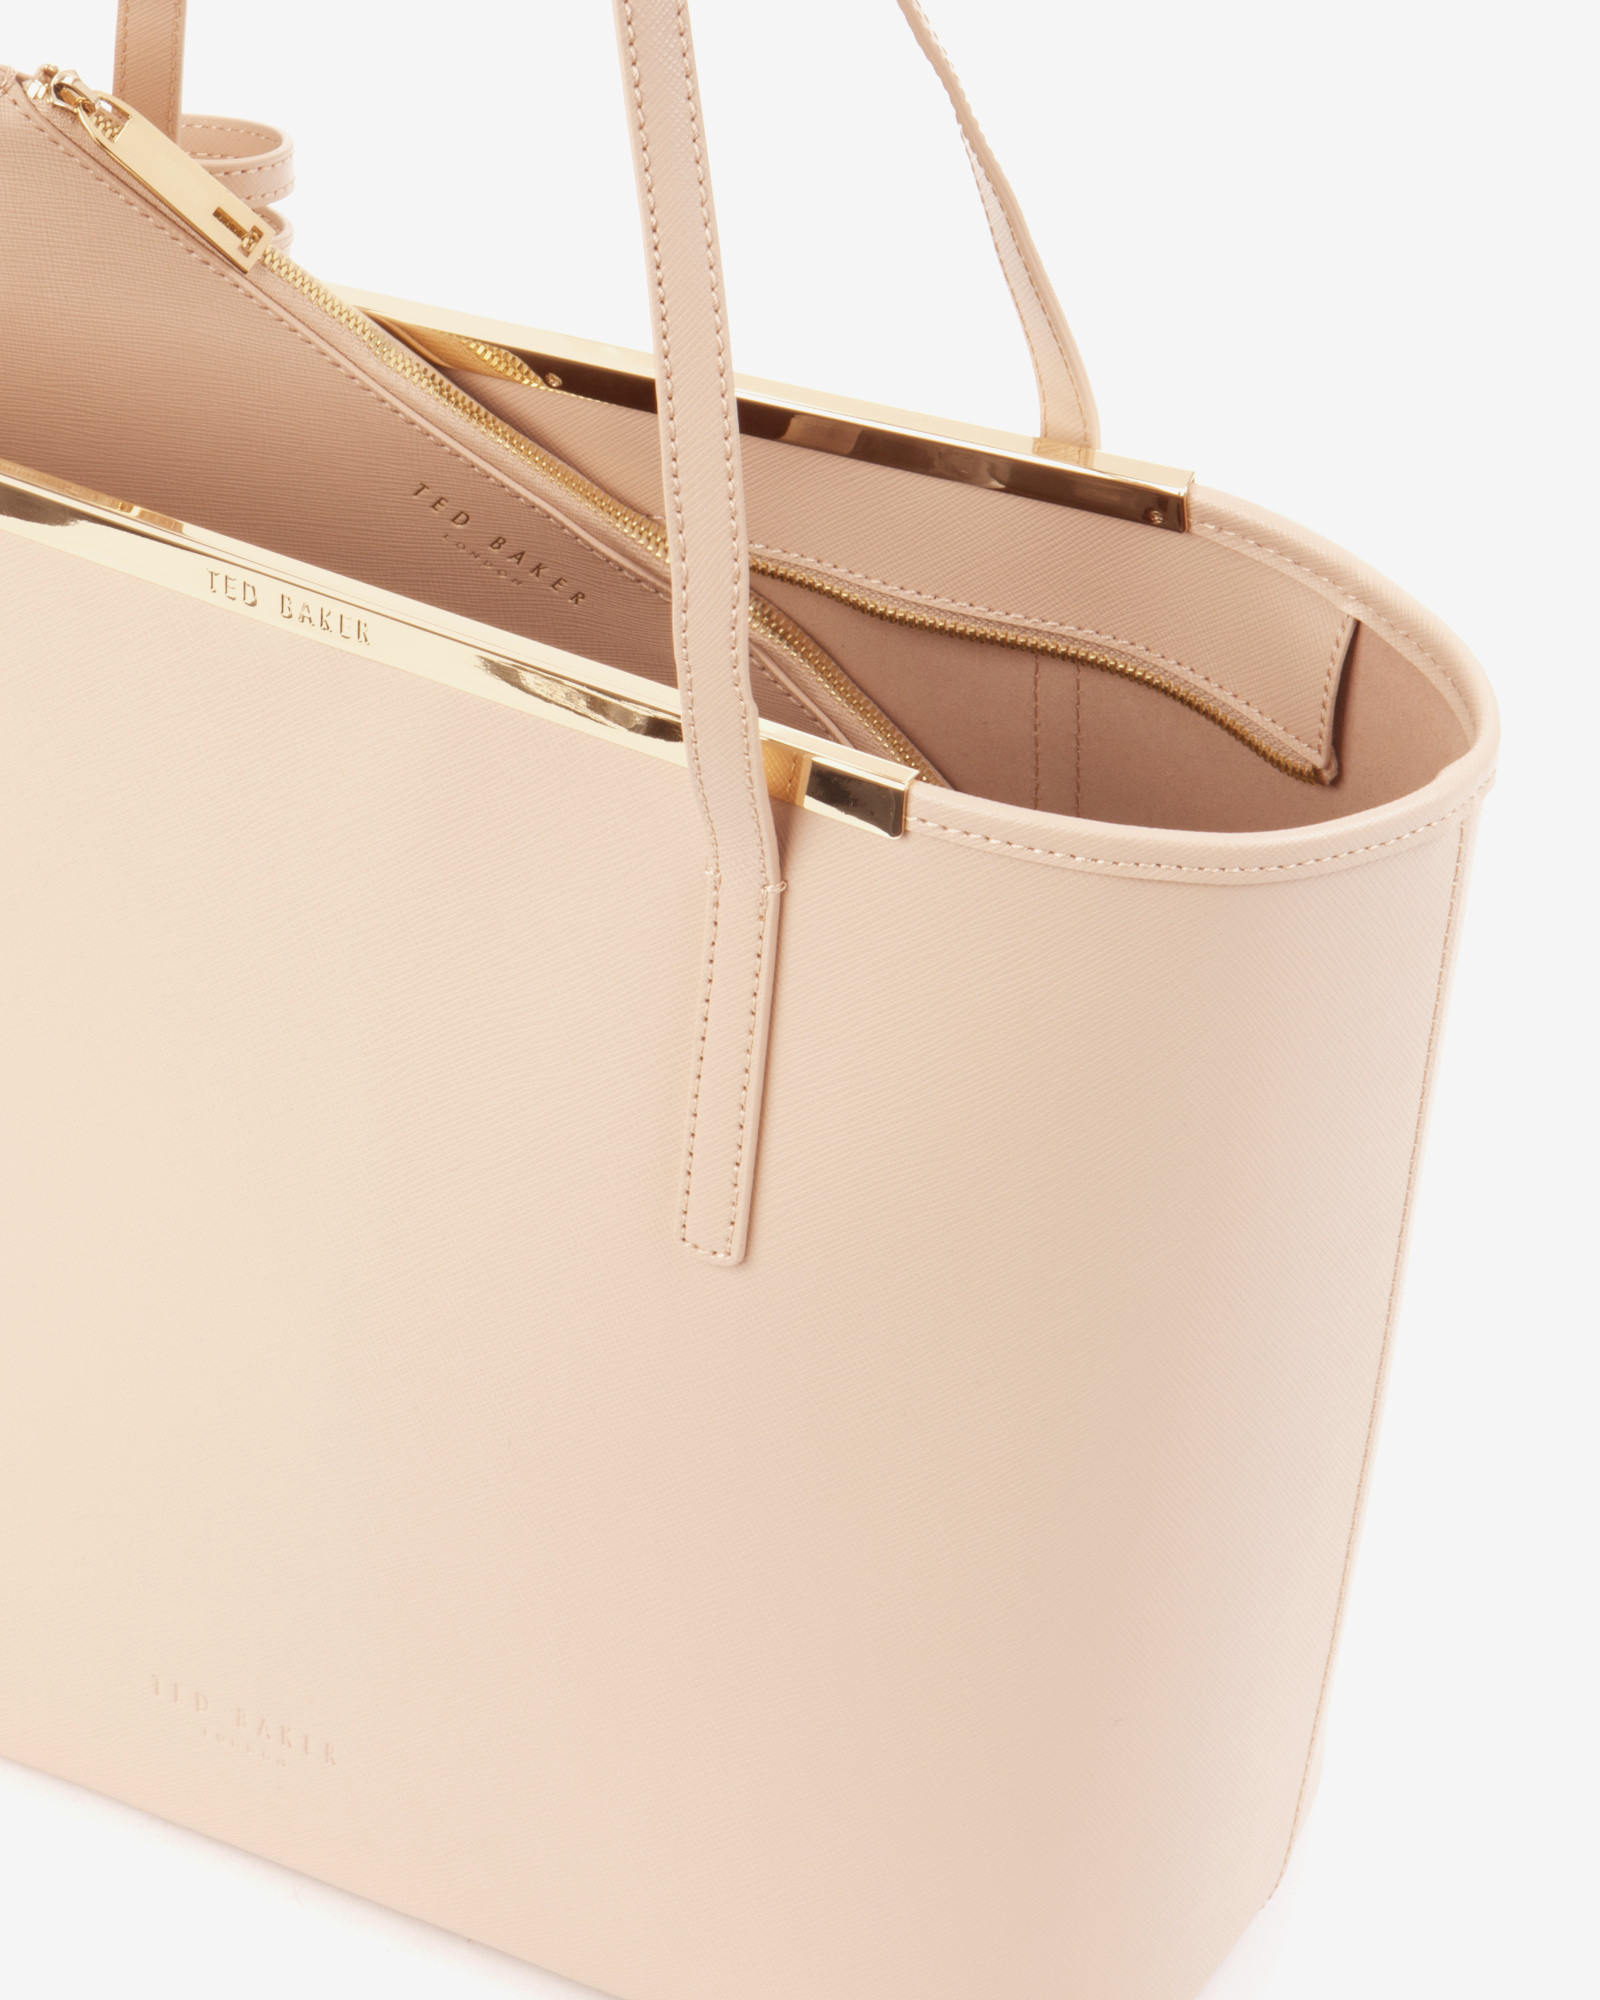 Ted Baker Leather Shopper Bag in Taupe (Natural) - Lyst